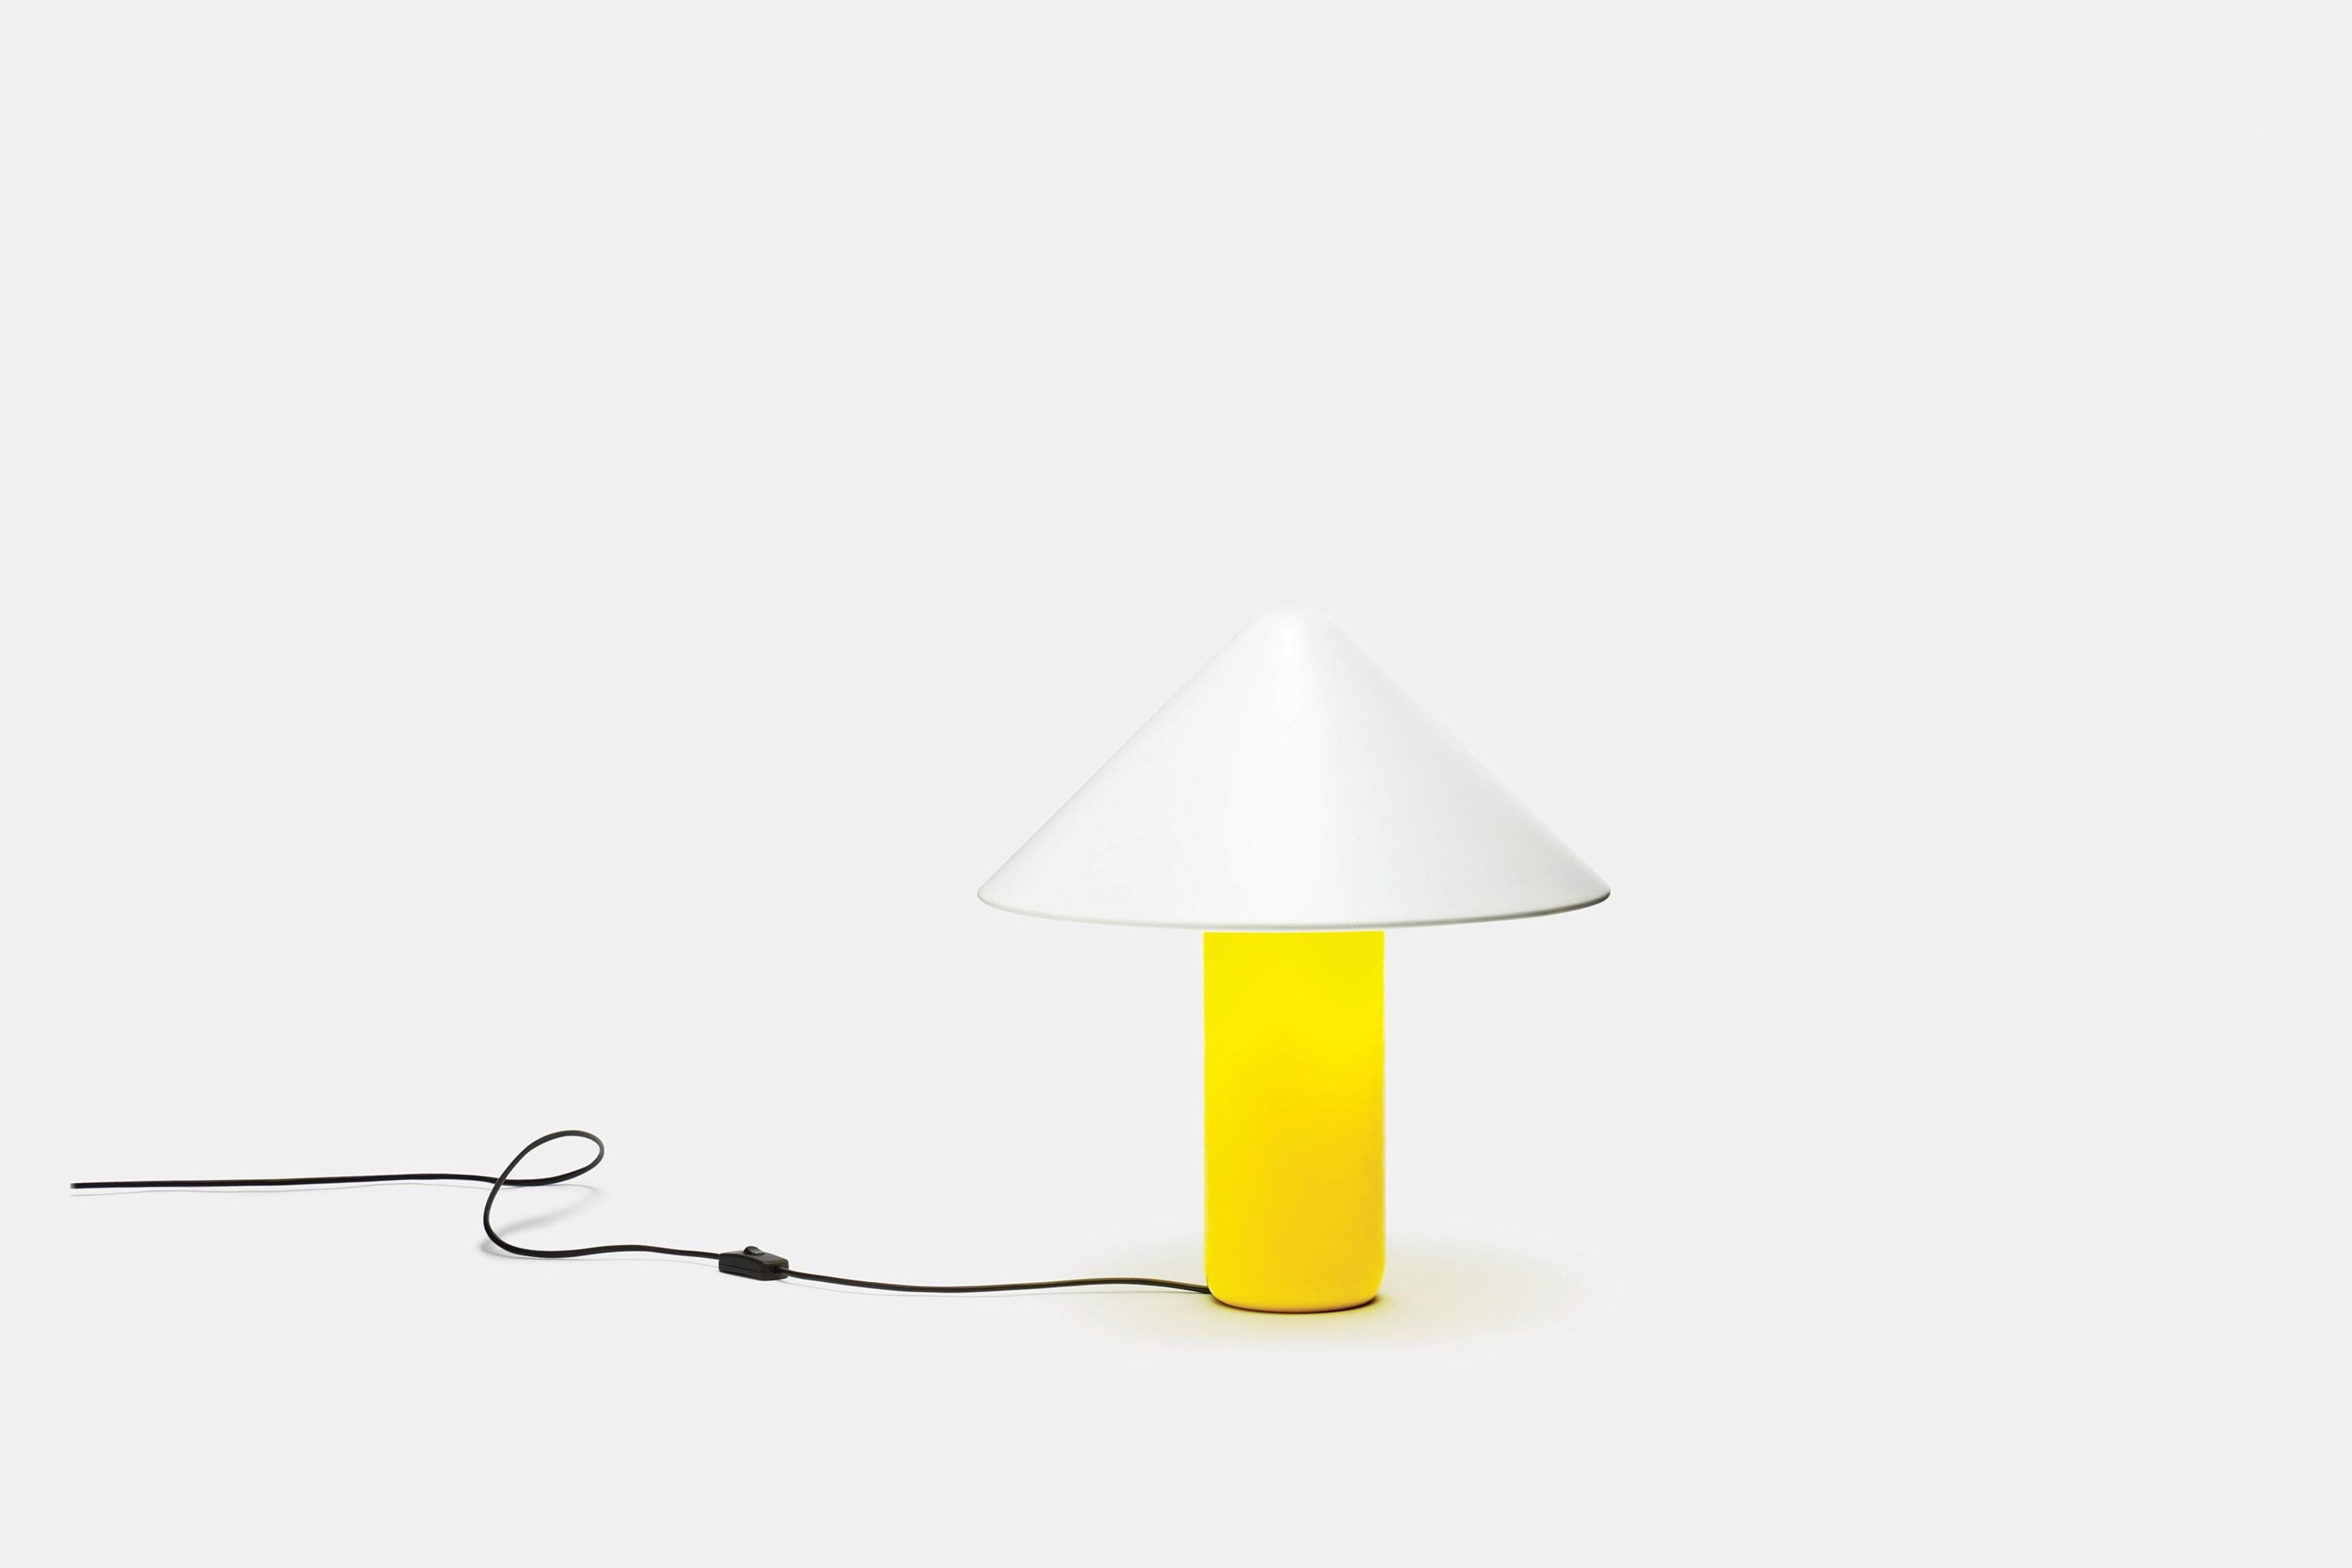 The Topp lamp draws its inspiration from two distinctive silhouettes: the classic ‘Atollo’ lamp by Viso Magistretti and a graphic arrow. The foot is of strong resin whose yellow colour contrasts strikingly with the white aluminium shade. 

Measure: